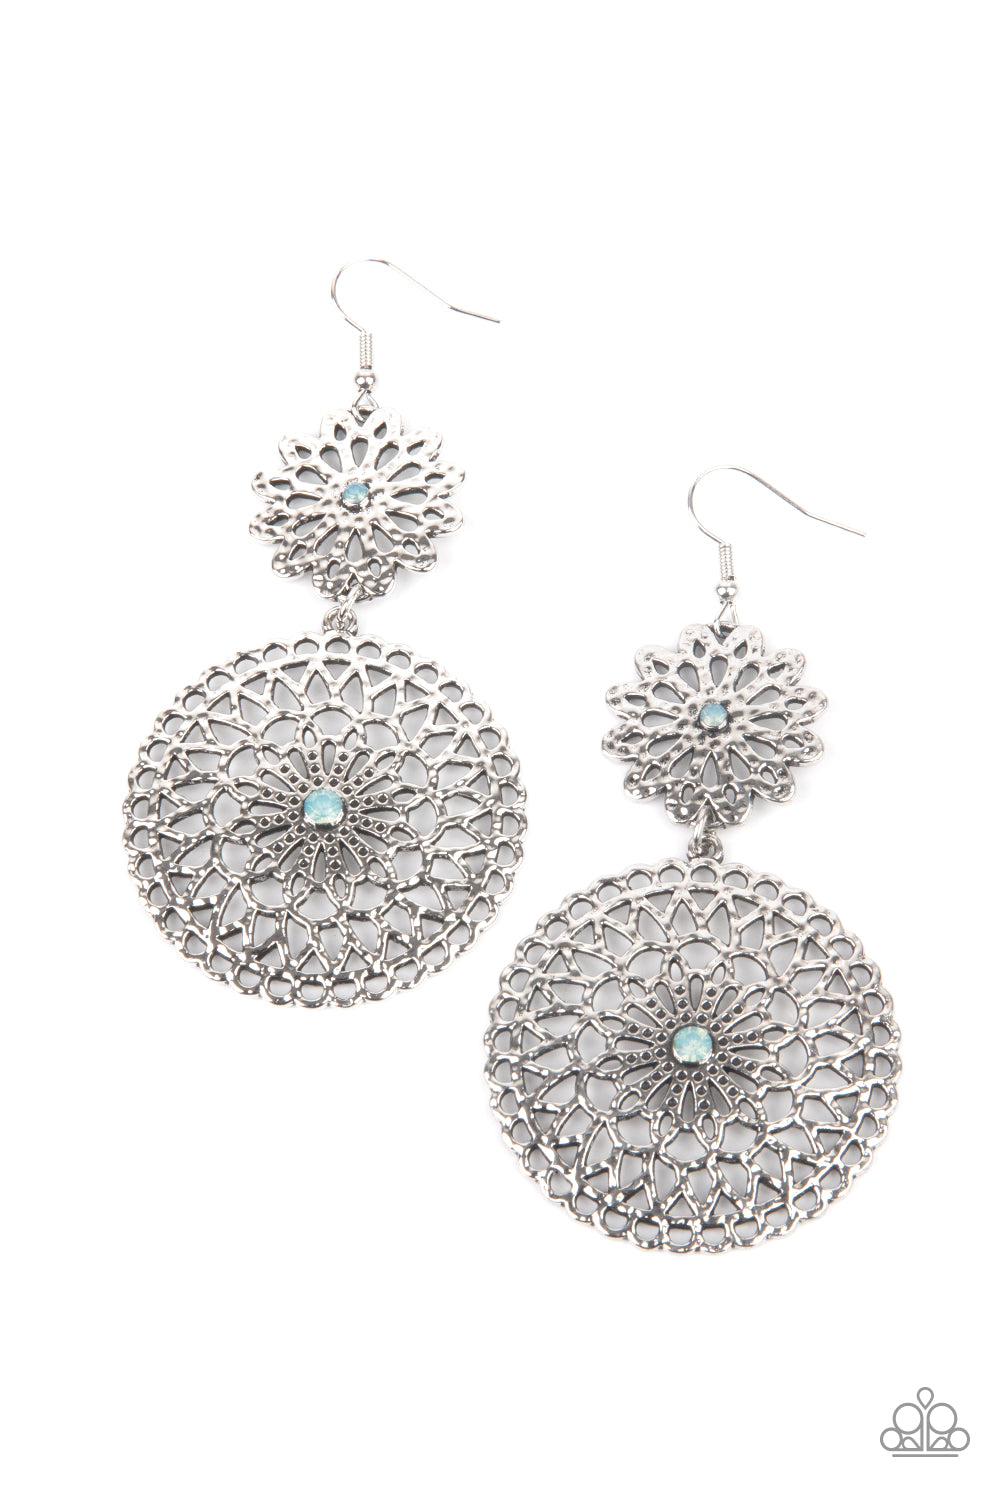 Garden Mantra Blue Earring - Paparazzi Accessories. Dotted with Cerulean opal rhinestone centers, a hammered silver floral frame links with an oversized silver mandala-like frame, creating a whimsical lure. Earring attaches to a standard fishhook fitting.  All Paparazzi Accessories are lead free and nickel free!  Sold as one pair of earrings.